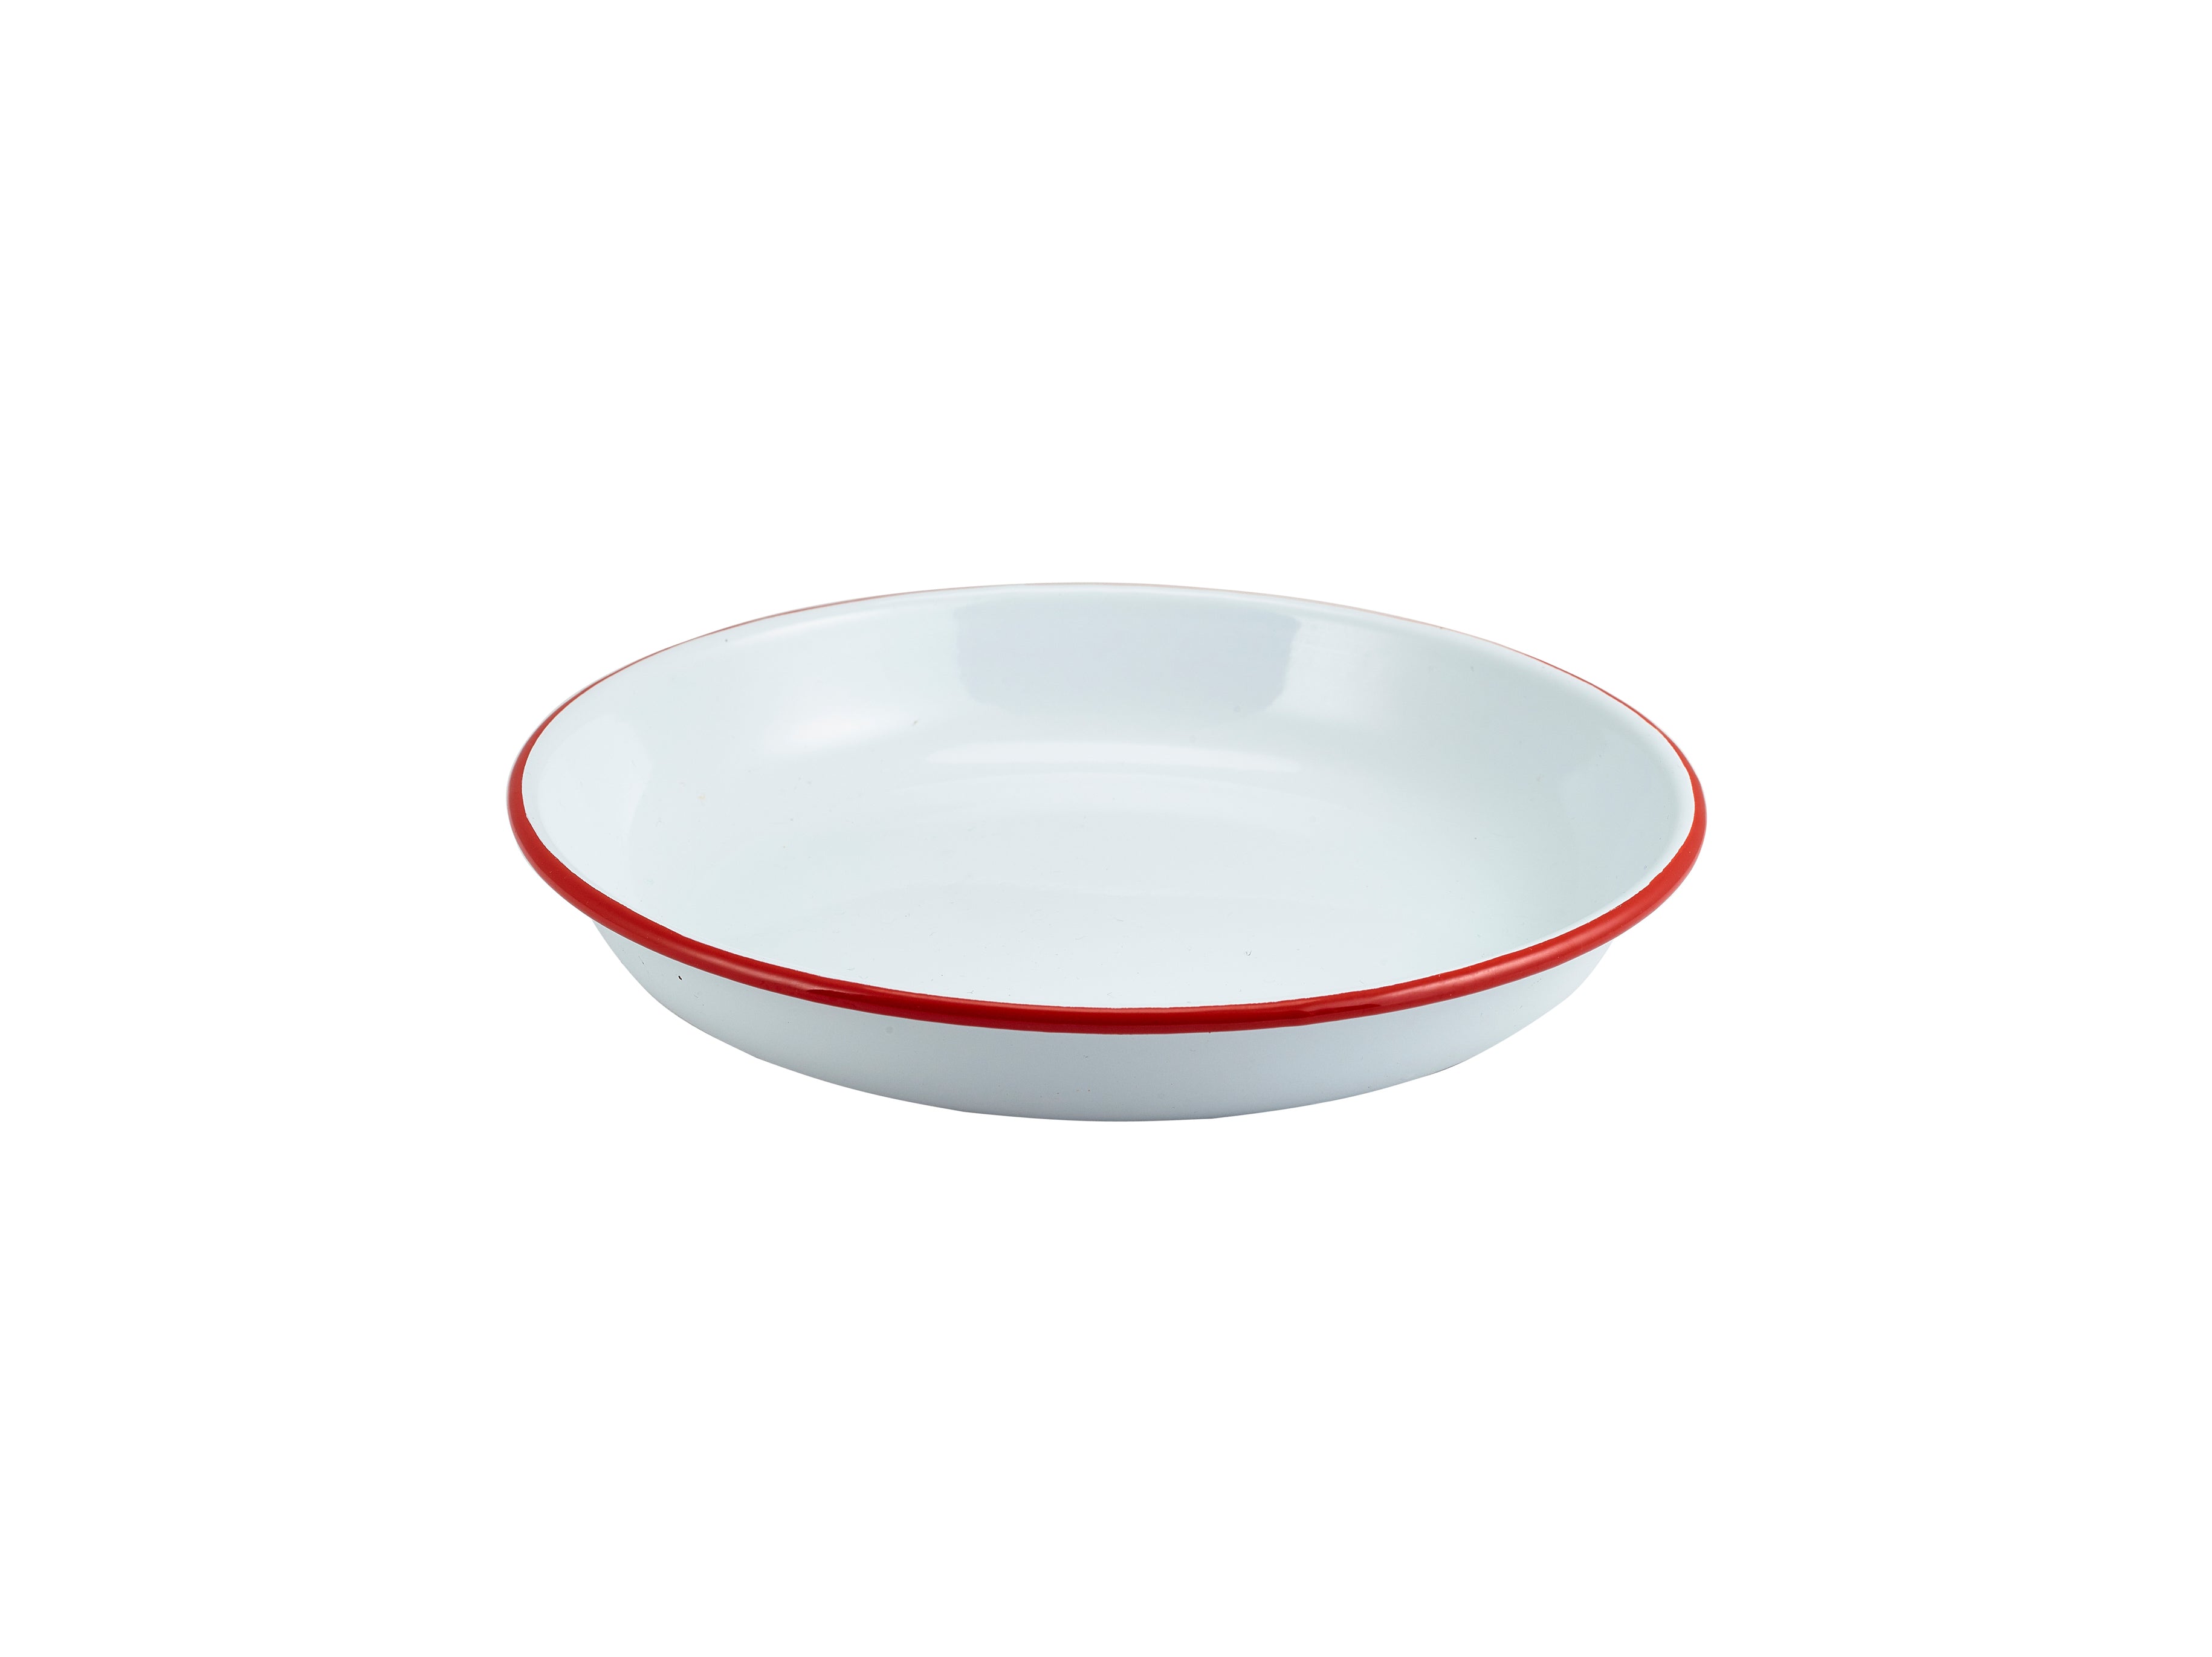 Enamel Rice/Pasta Plate White with Red Rim 24cm